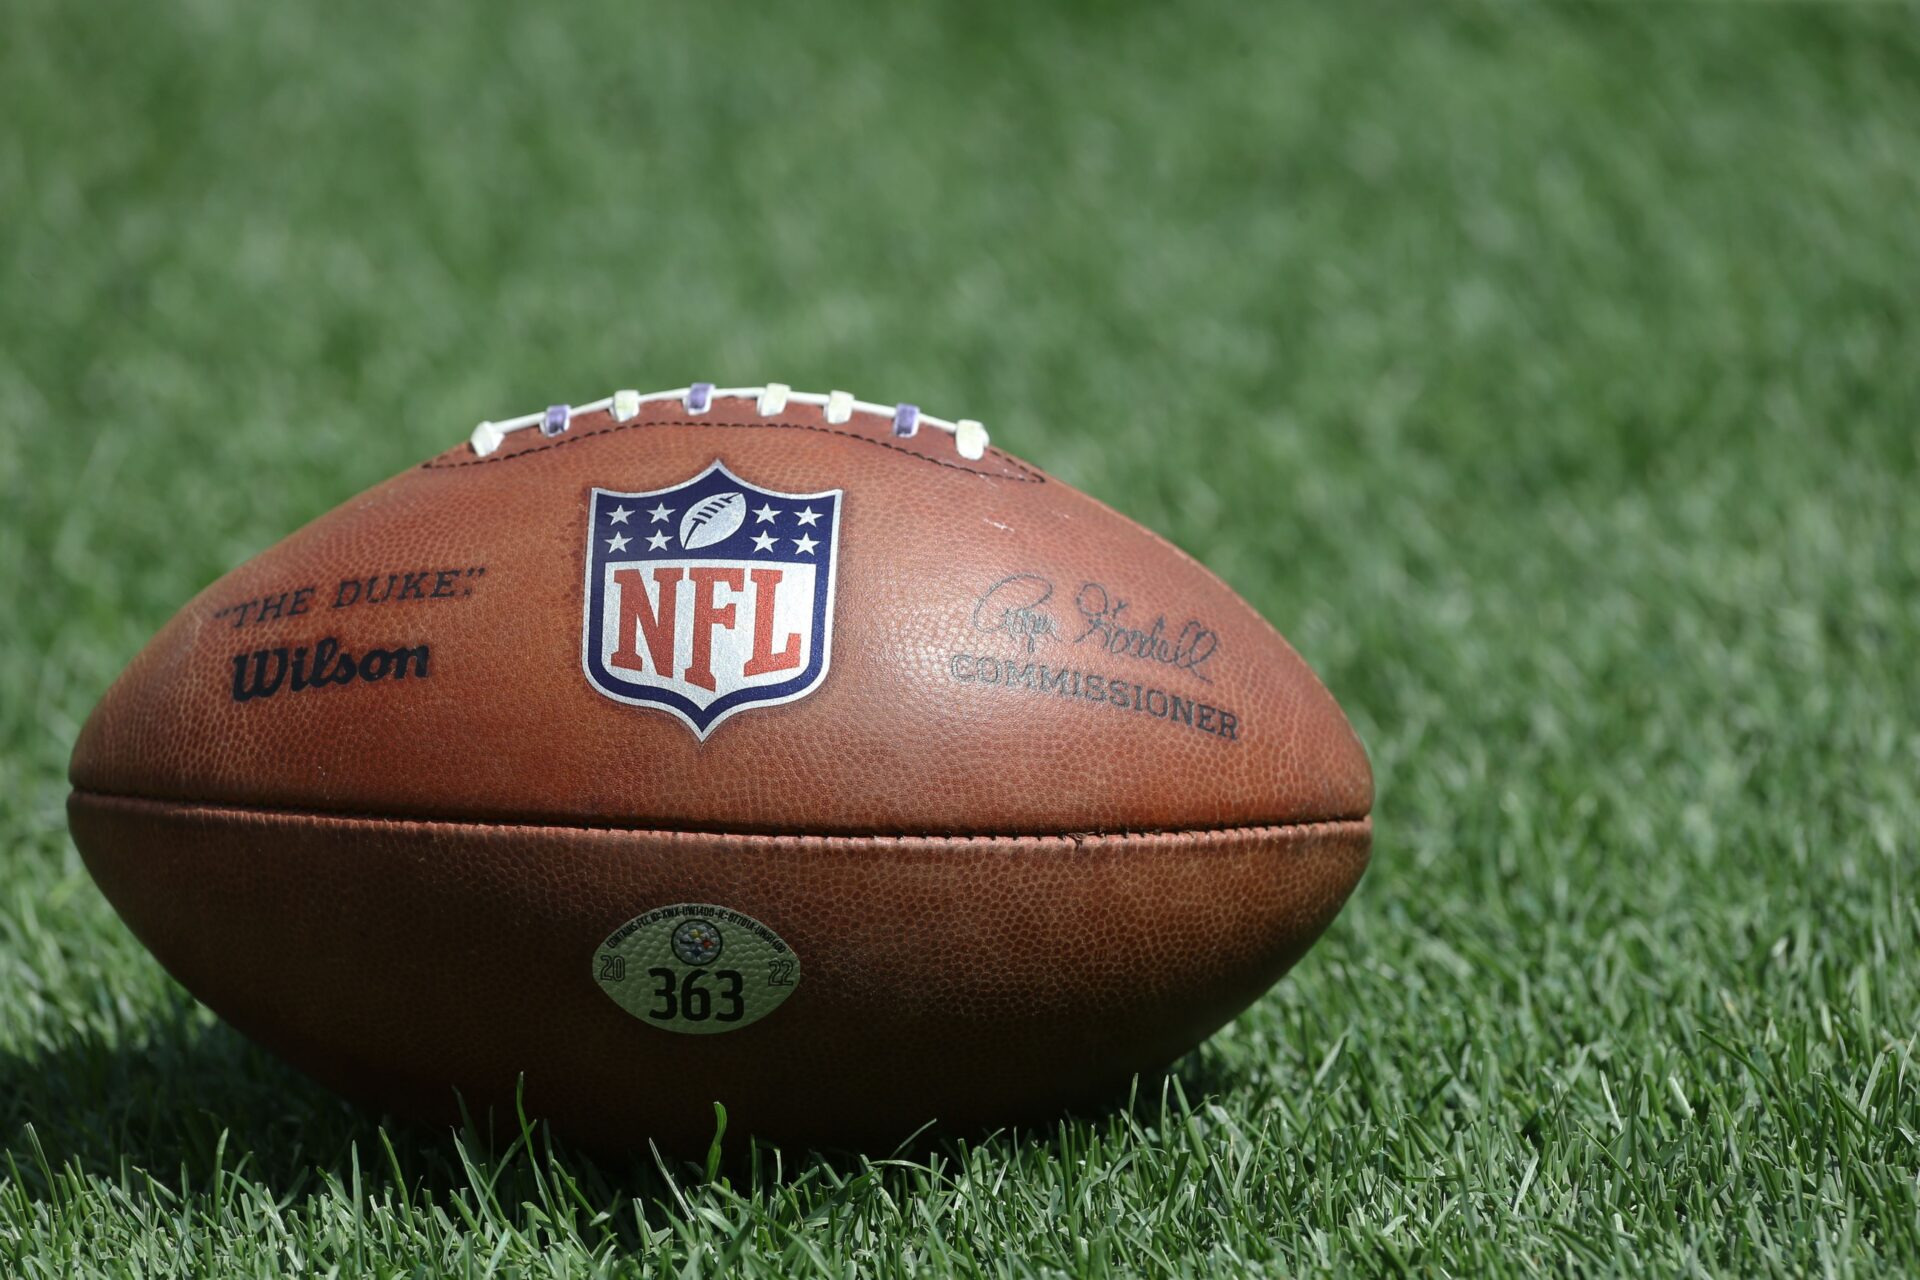 An NFL football displayed on the field.